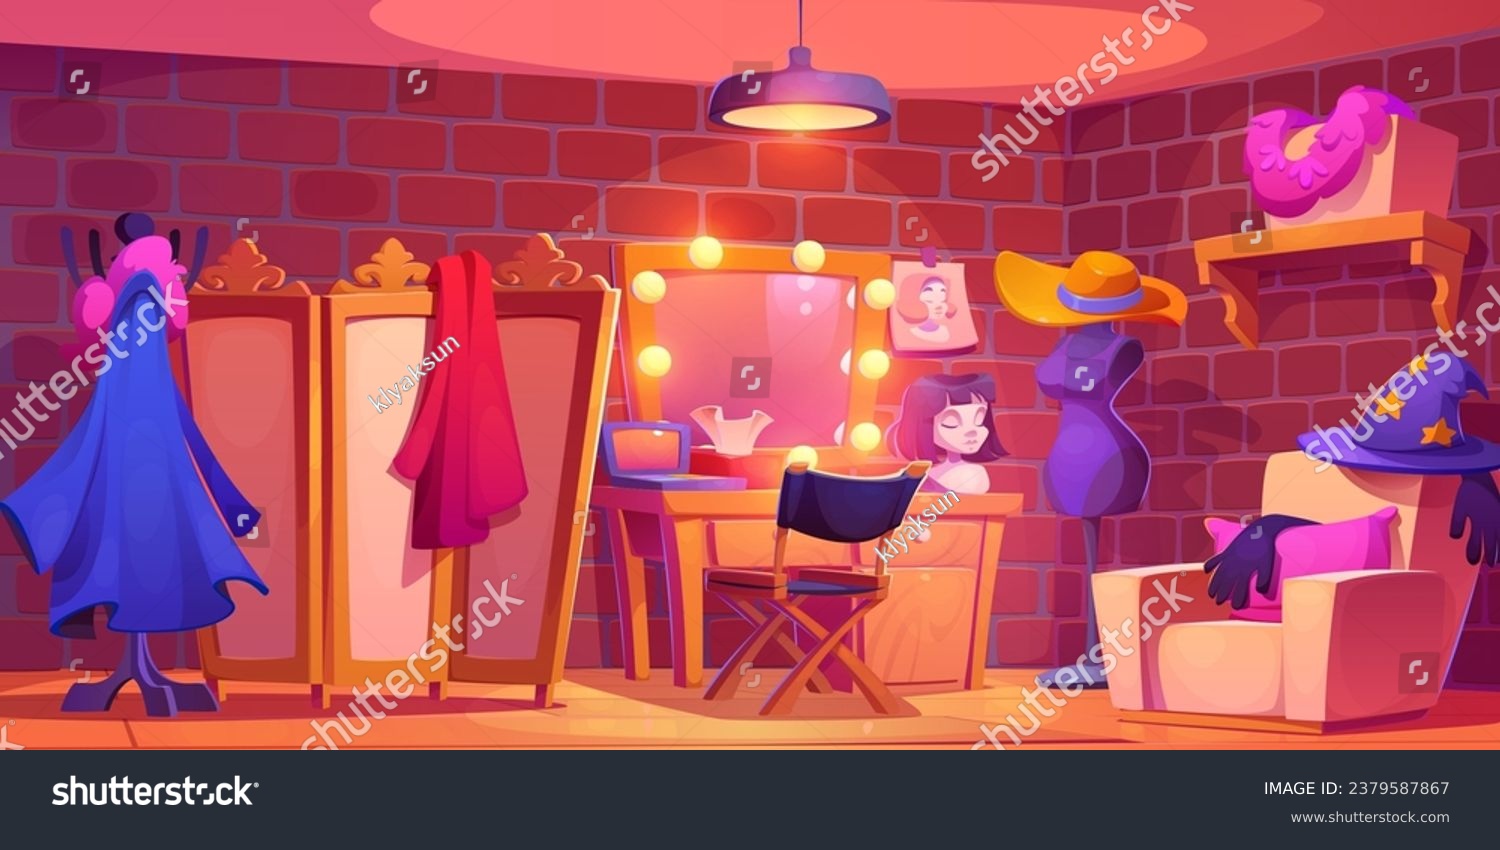 SVG of Backstage theater room interior with table and mirror for makeup, clothing and wigs, screen for dressing. Cartoon vector of changing clothes and actor prepare area before performance or filming. svg